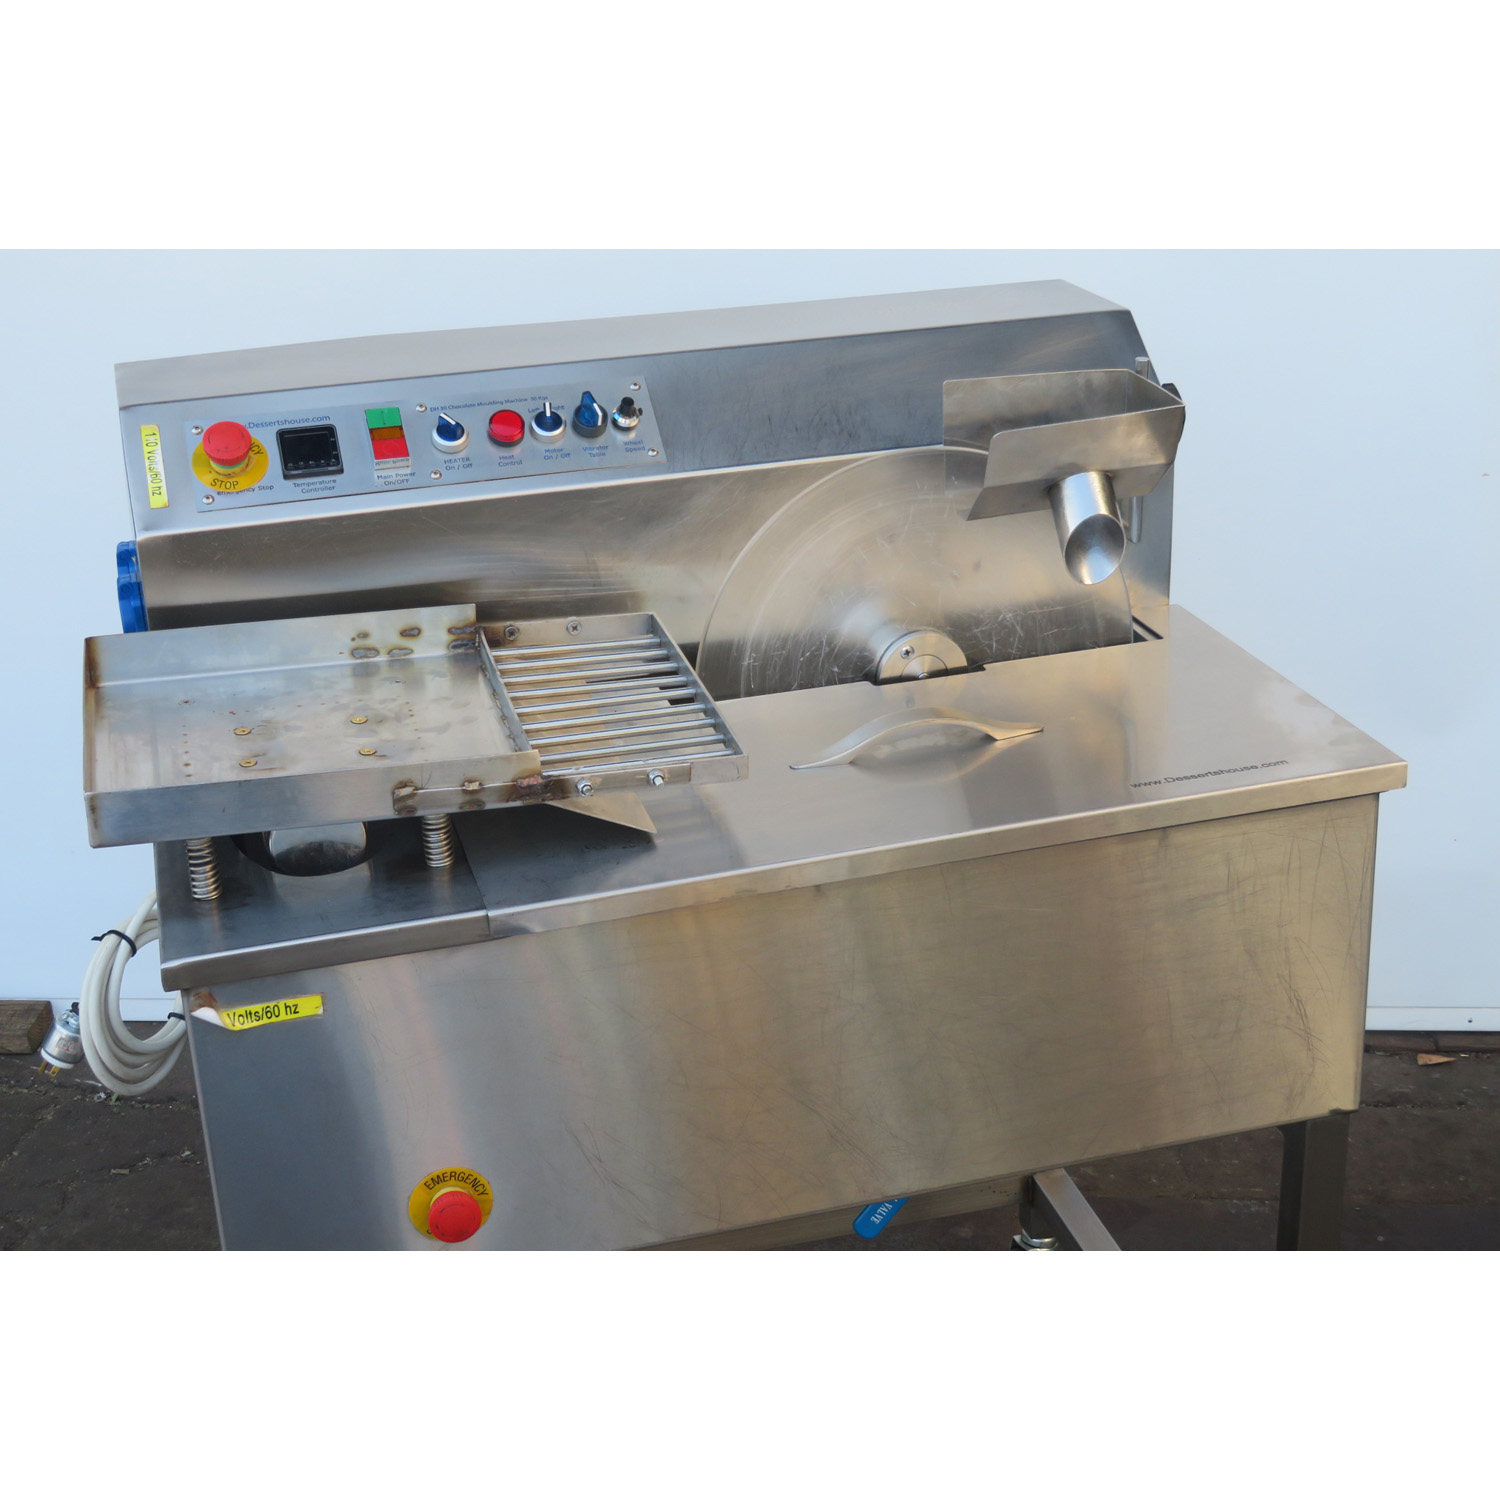 Chocolate Tempering Machine, 110 Volts, Used Excellent Condition image 4